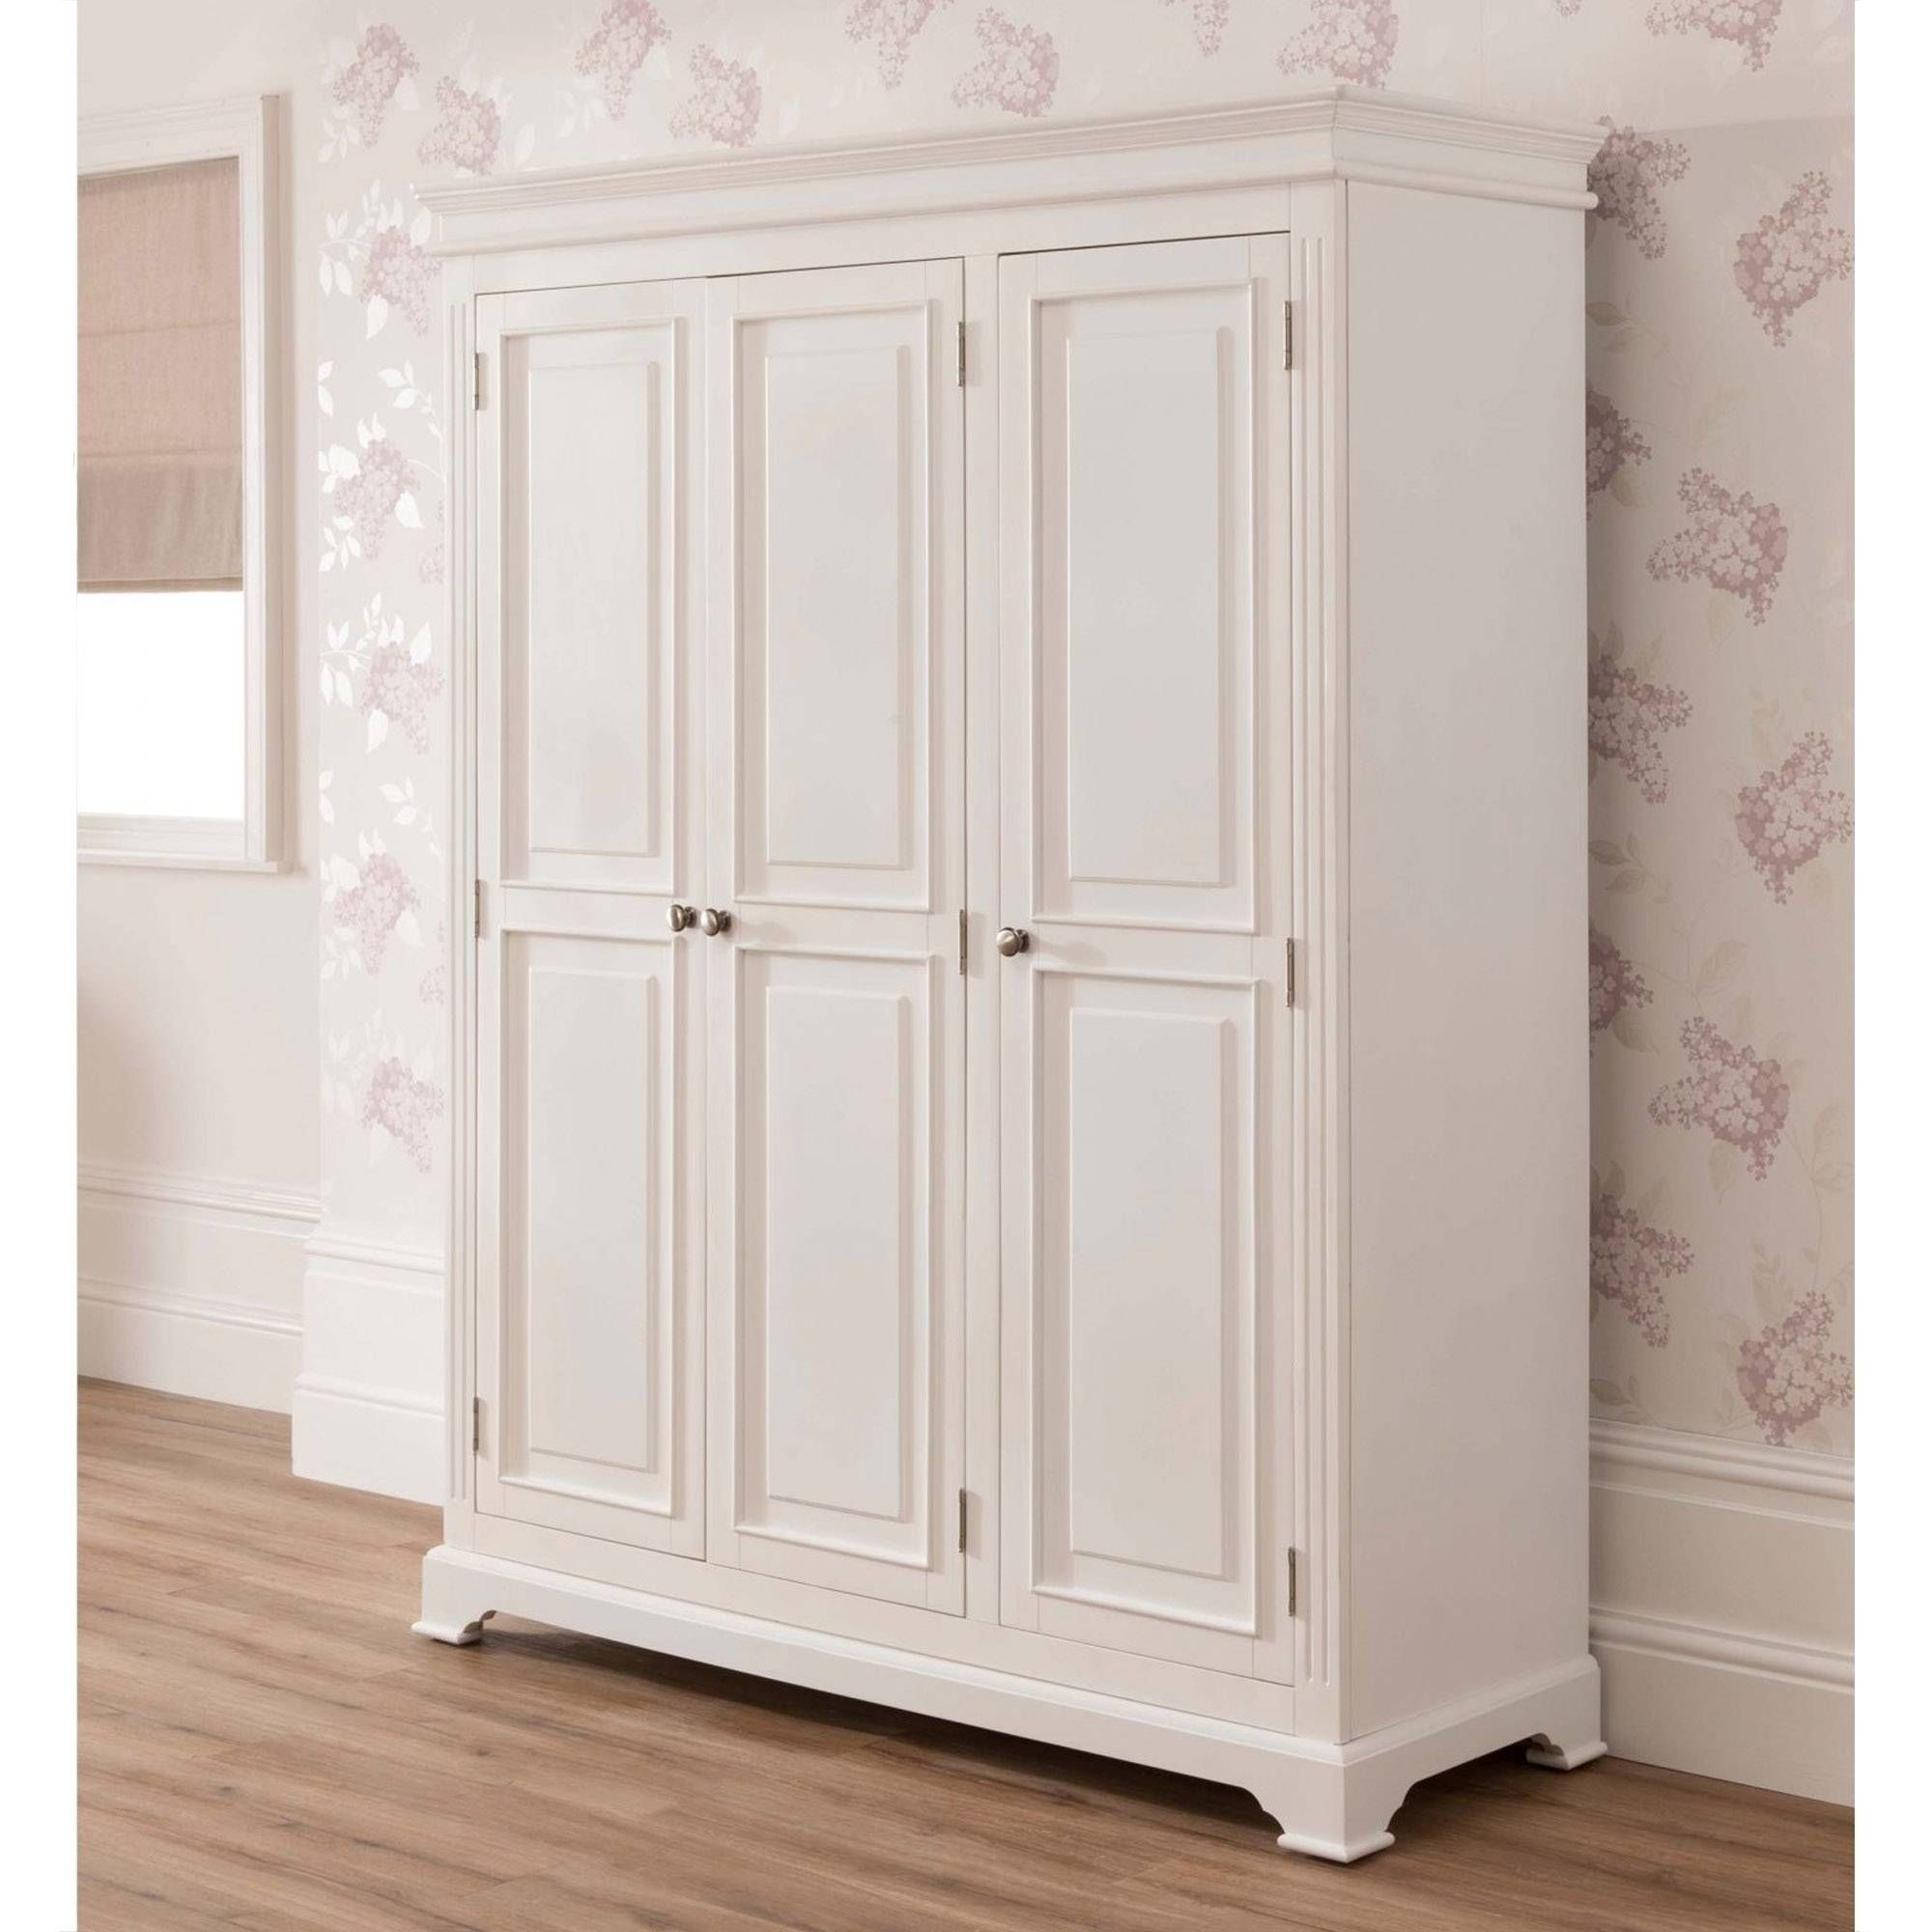 Sophia Shabby Chic Wardrobe Is A Fantastic Addition To Our Antique Within Shabby Chic Wardrobes (Photo 1 of 15)